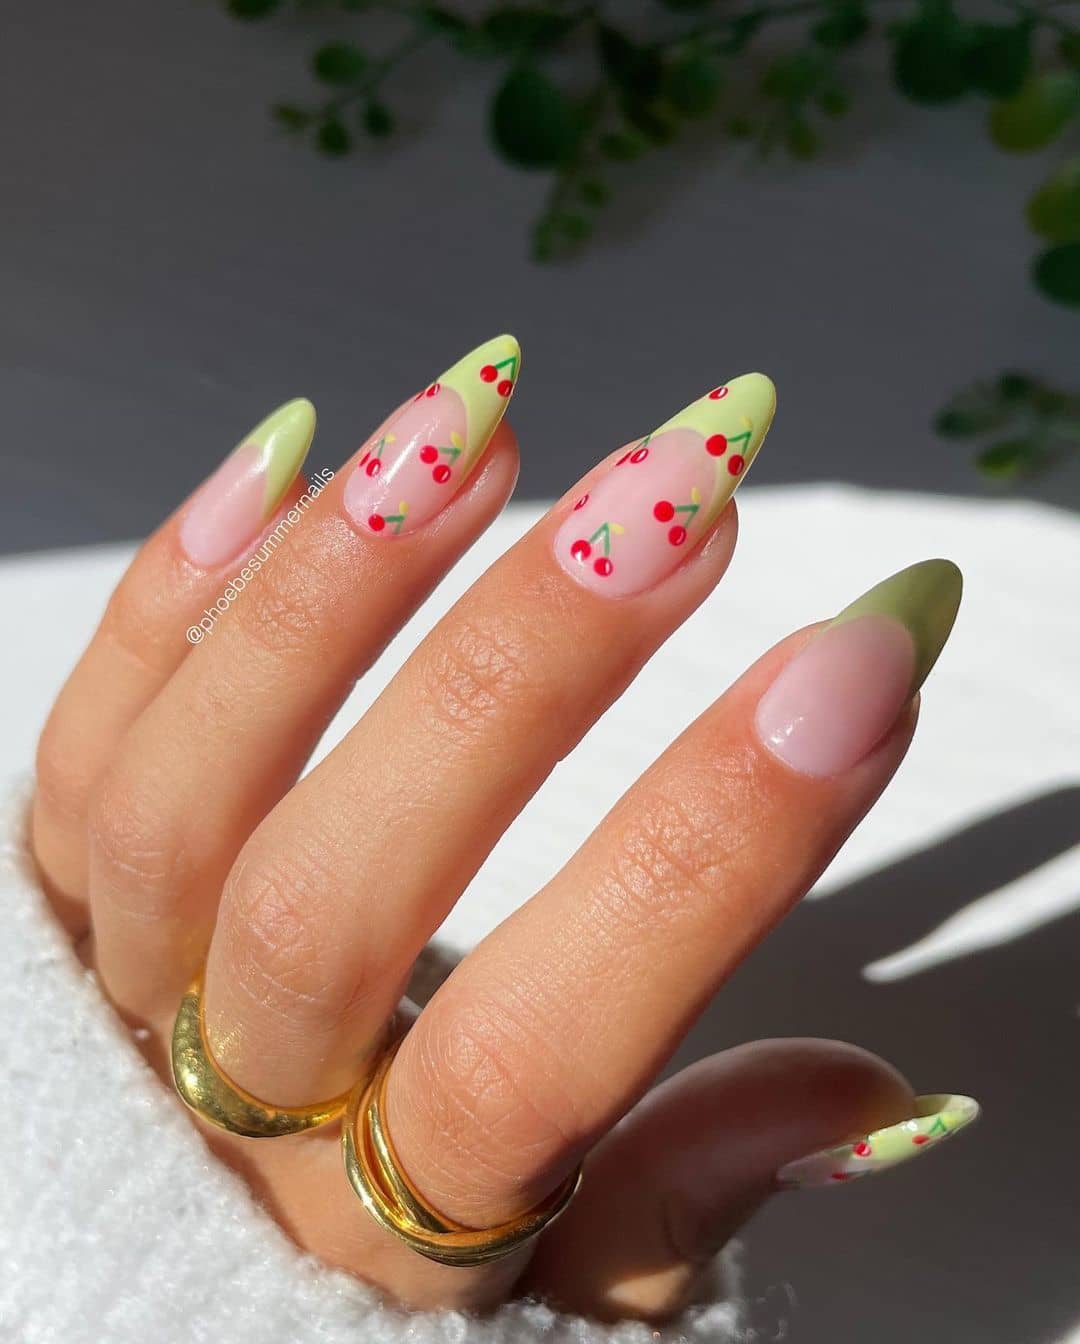 Over 100 Bright Summer Nail Art Designs That Will Be So Trendy images 110